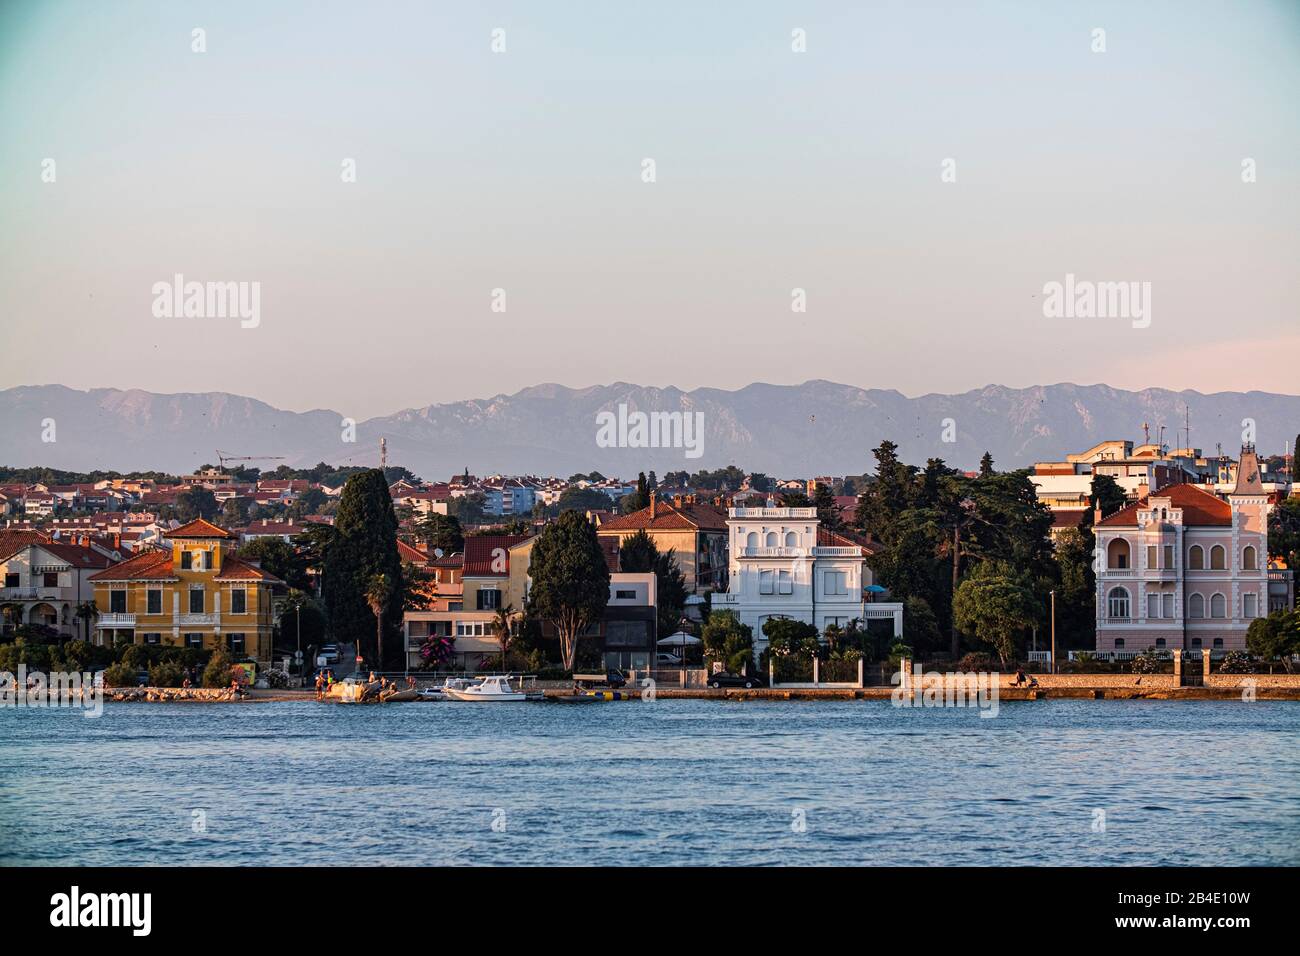 Part of the city Zadar with the mountains 'Velebit' in the background. Stock Photo